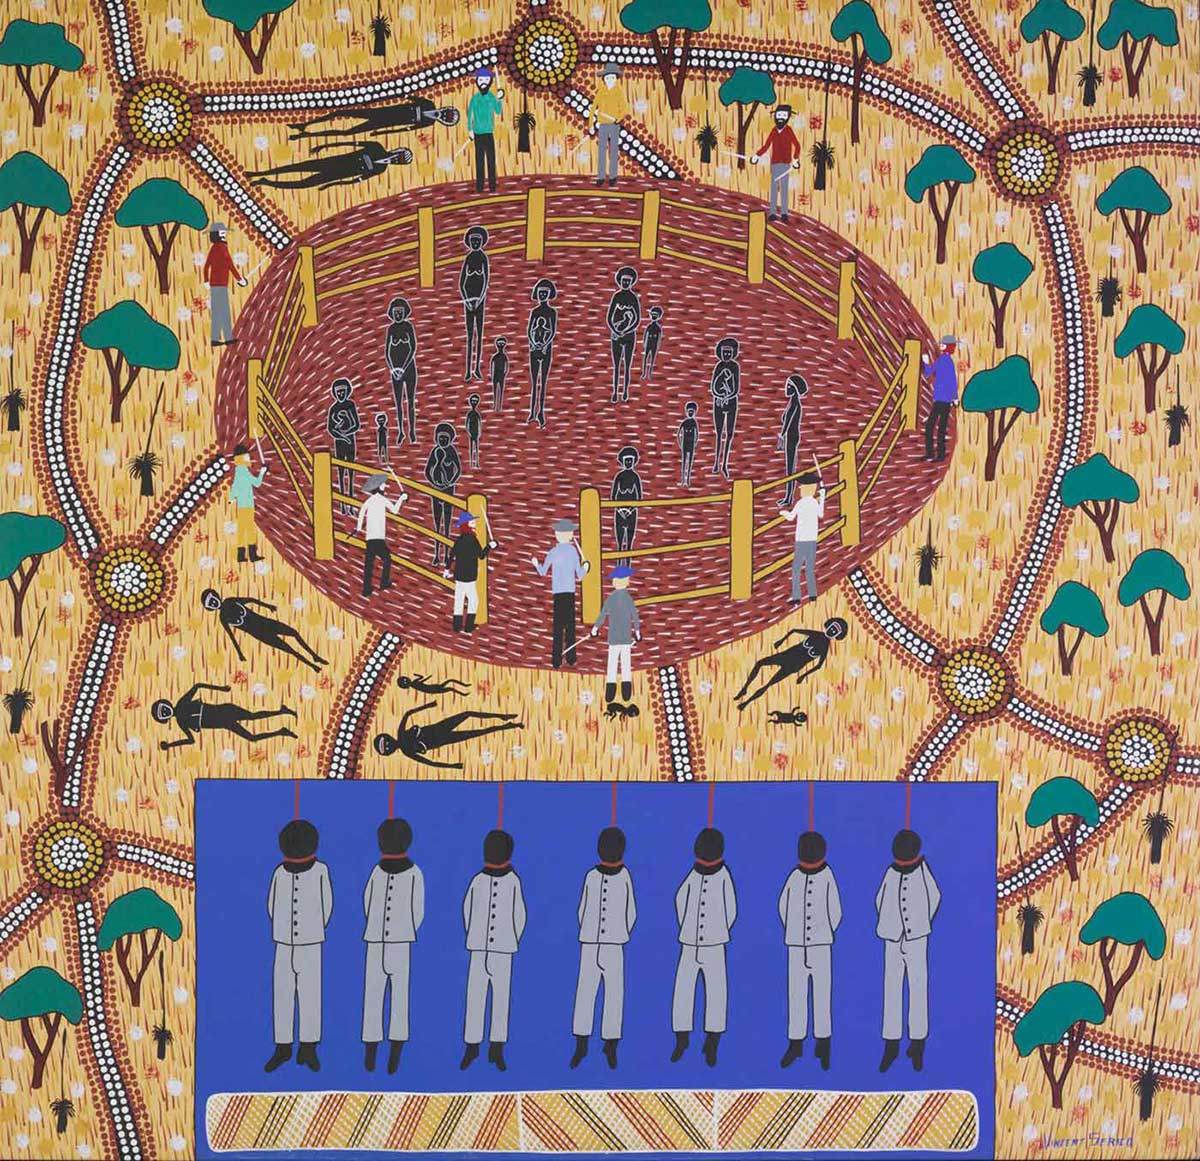 An acrylic painting on canvas depicting a circular corral area surrounding fourteen Aboriginal figures, while ten white figures stand around the outside. The surrounding landscape features trees and nine prone Aboriginal figures. At the bottom is a blue rectangular area containing seven hanging Aboriginal figures dressed in grey with their hands behind their backs. The artist's signature is written in blue in the bottom right corner and reads 'VINCENT SERICO'.